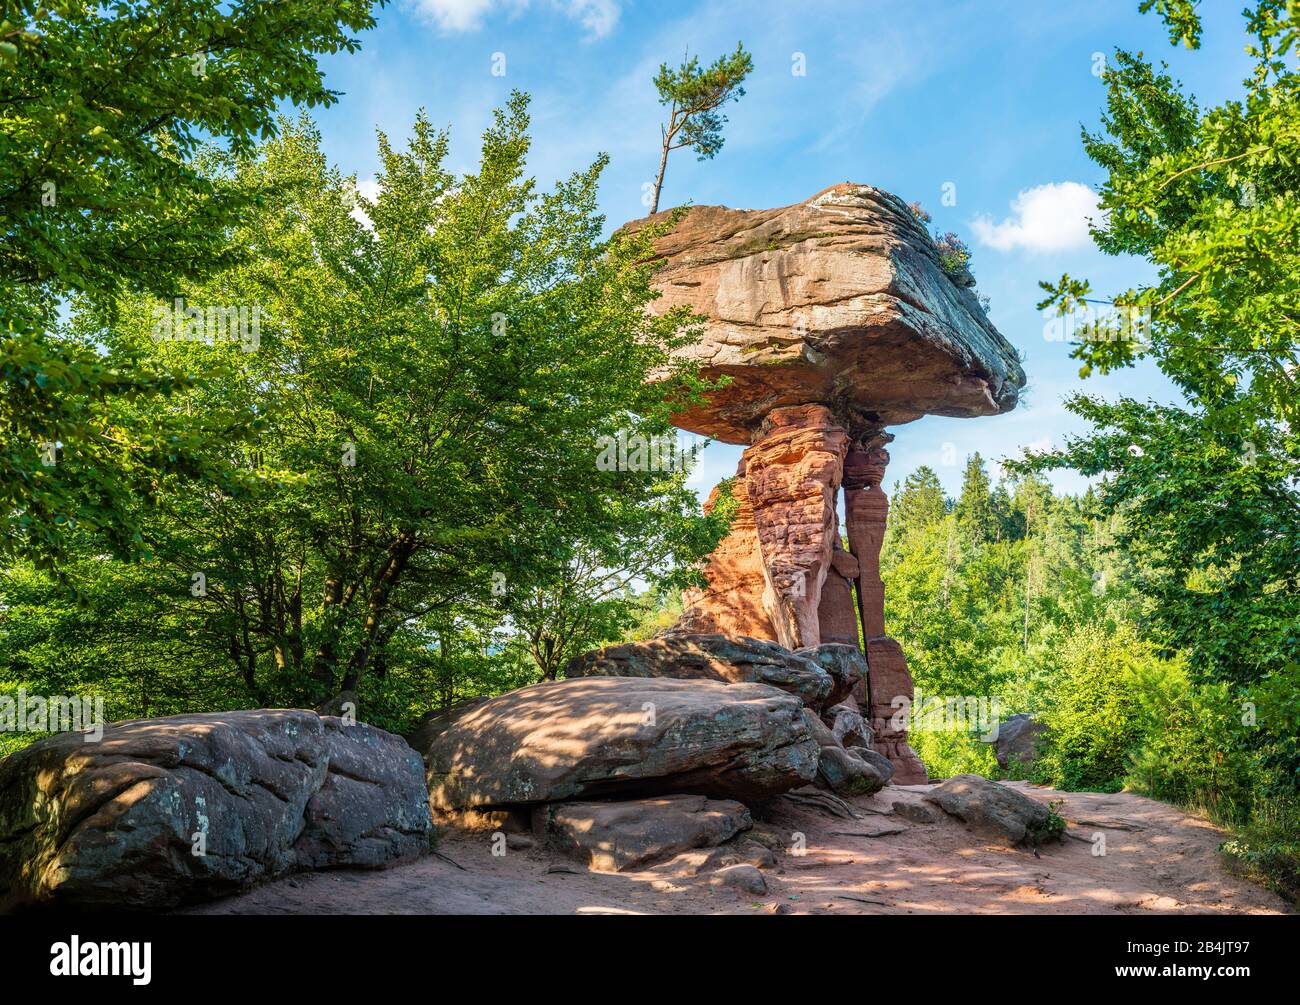 Devil's table at Hinterweidenthal im Wasgau, Palatinate highlands, natural wonders from Buntsandstein, created by erosion, south side Stock Photo